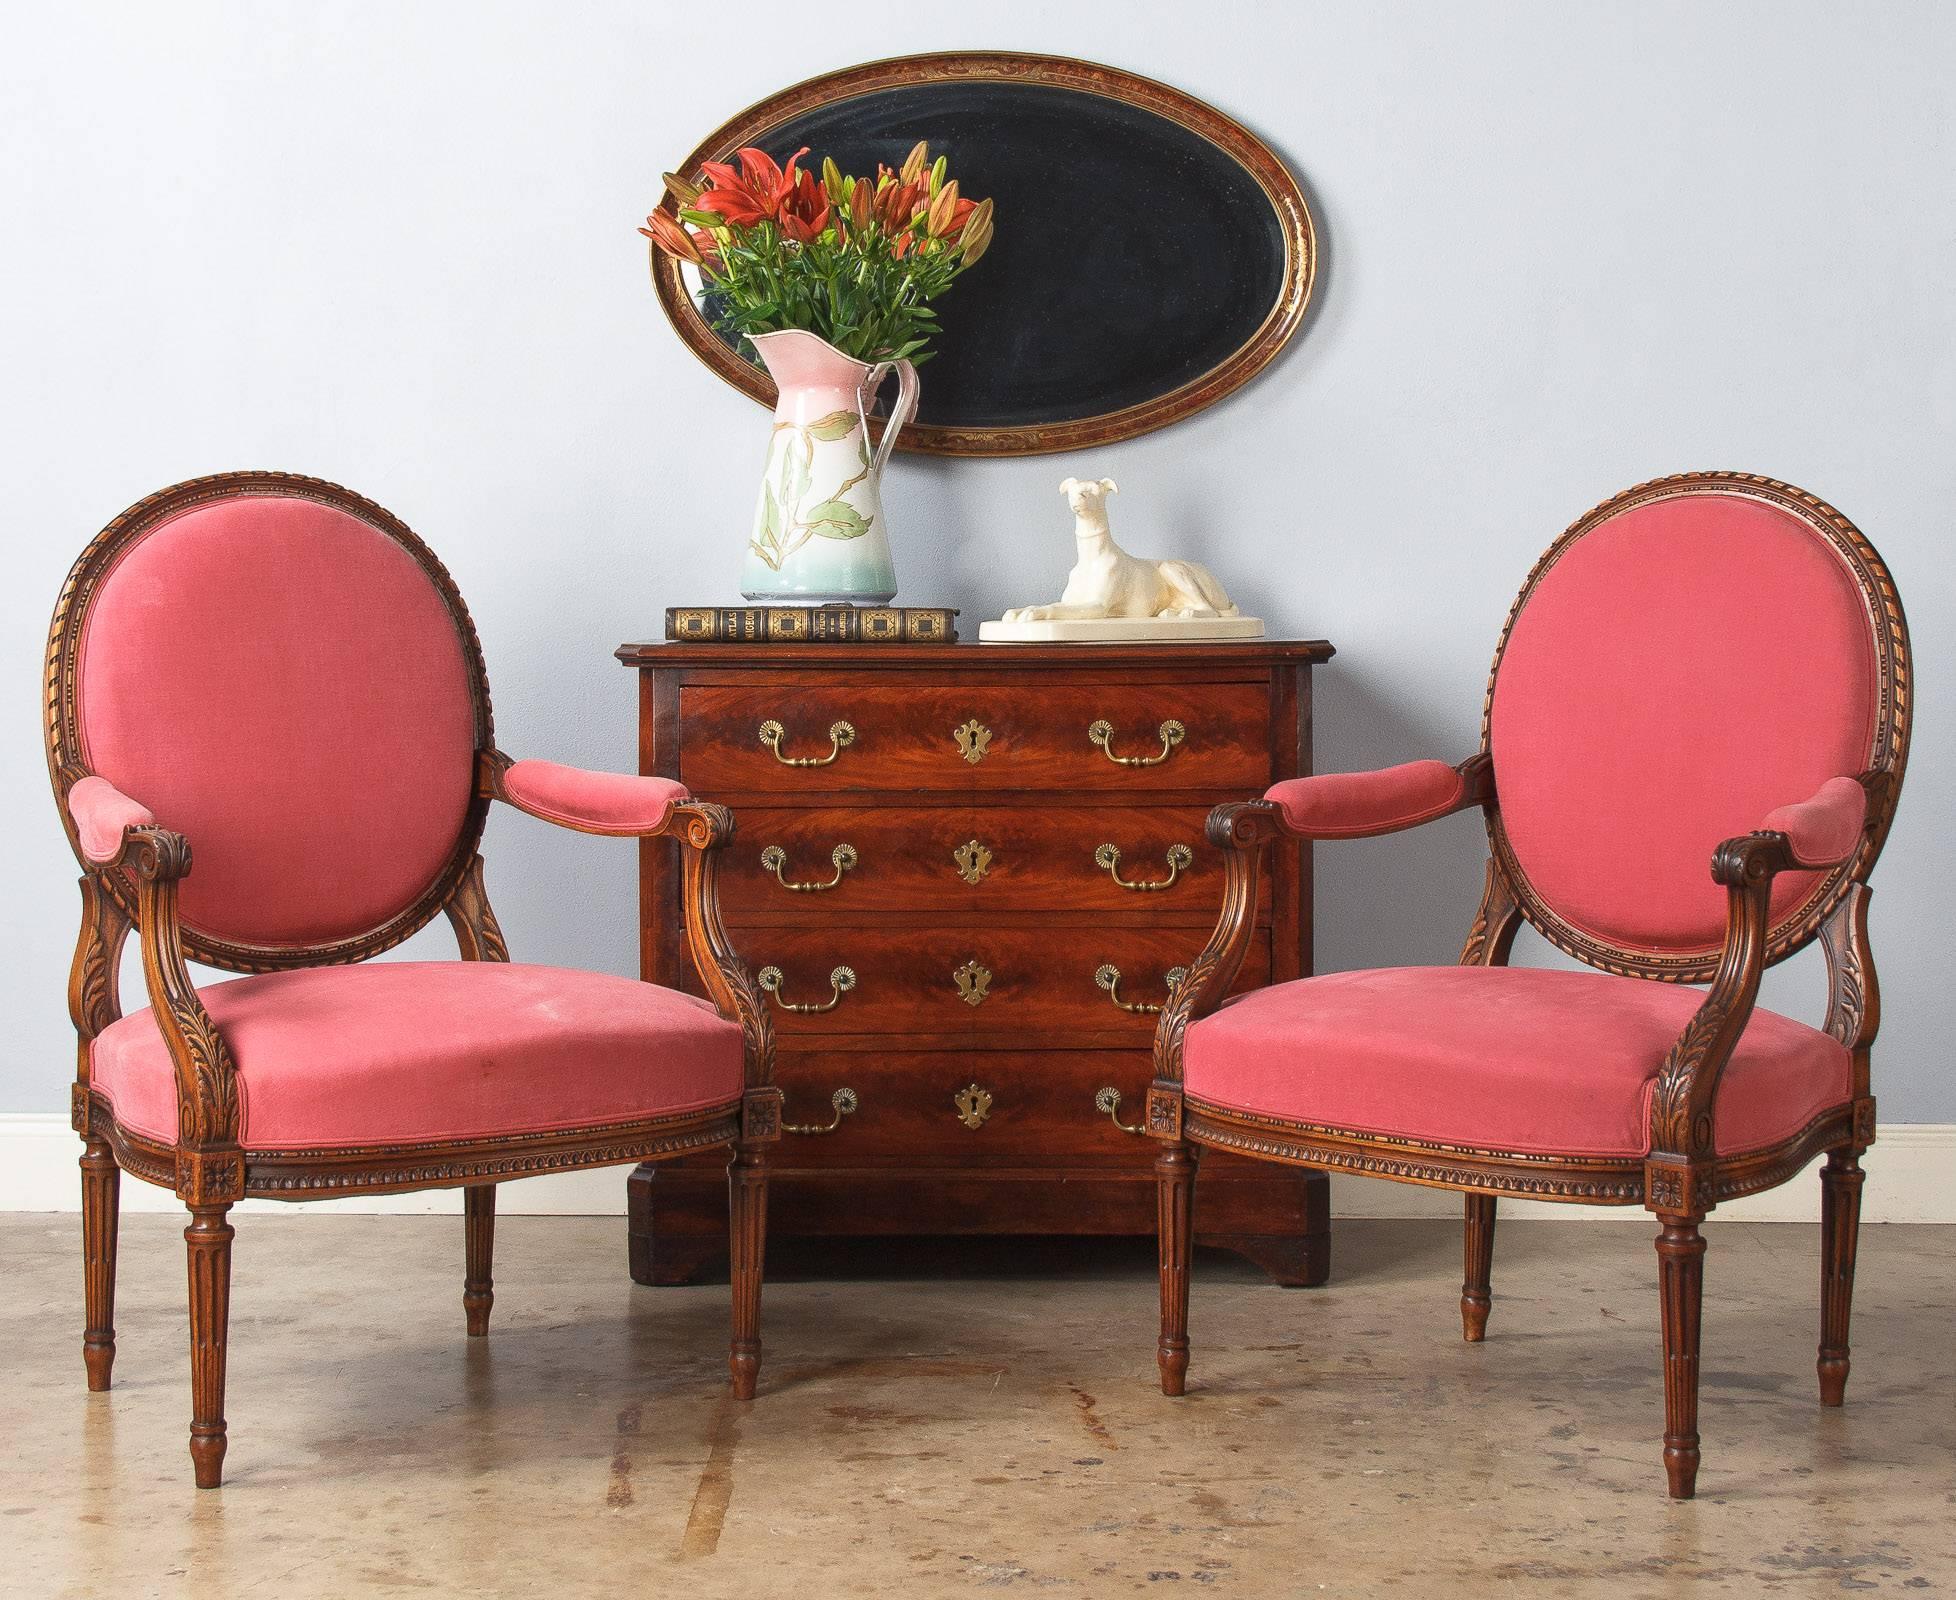 A wonderful pair of Louis XVI style cabriolet armchairs, circa 1900s, made of cherry wood with medallion backs. Abundant and delicate carvings including beading, rais-de-coeur, scrolls and acanthus leaves. Traditional Louis XVI style cable fluted